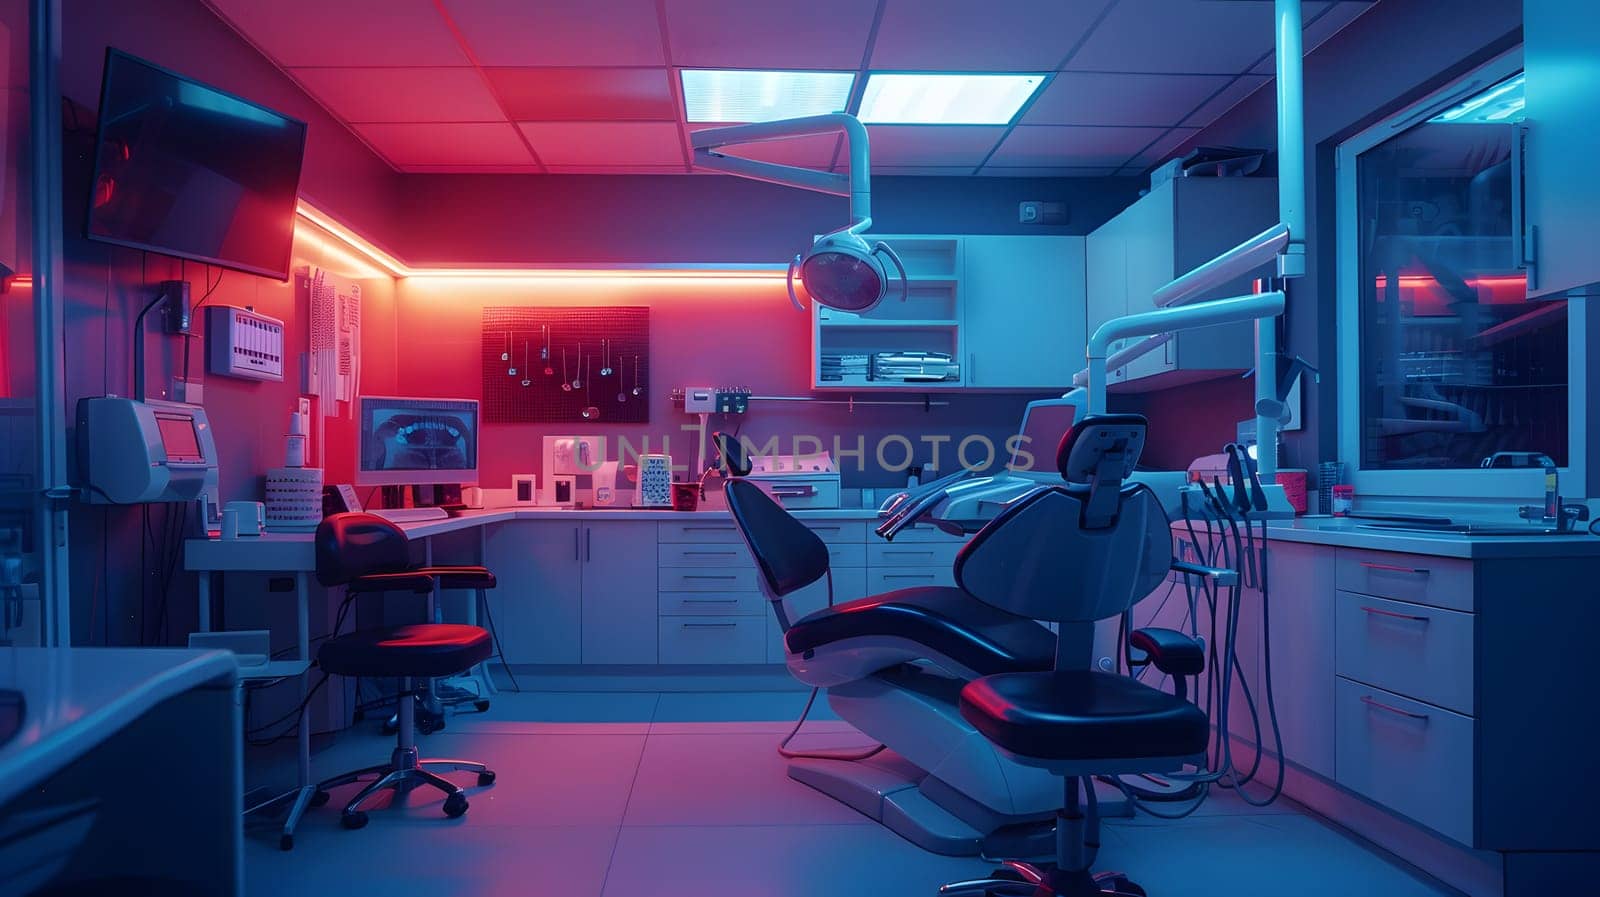 The building has a dental office with red and electric blue lights, a magenta dental chair, and indoor games for entertainment